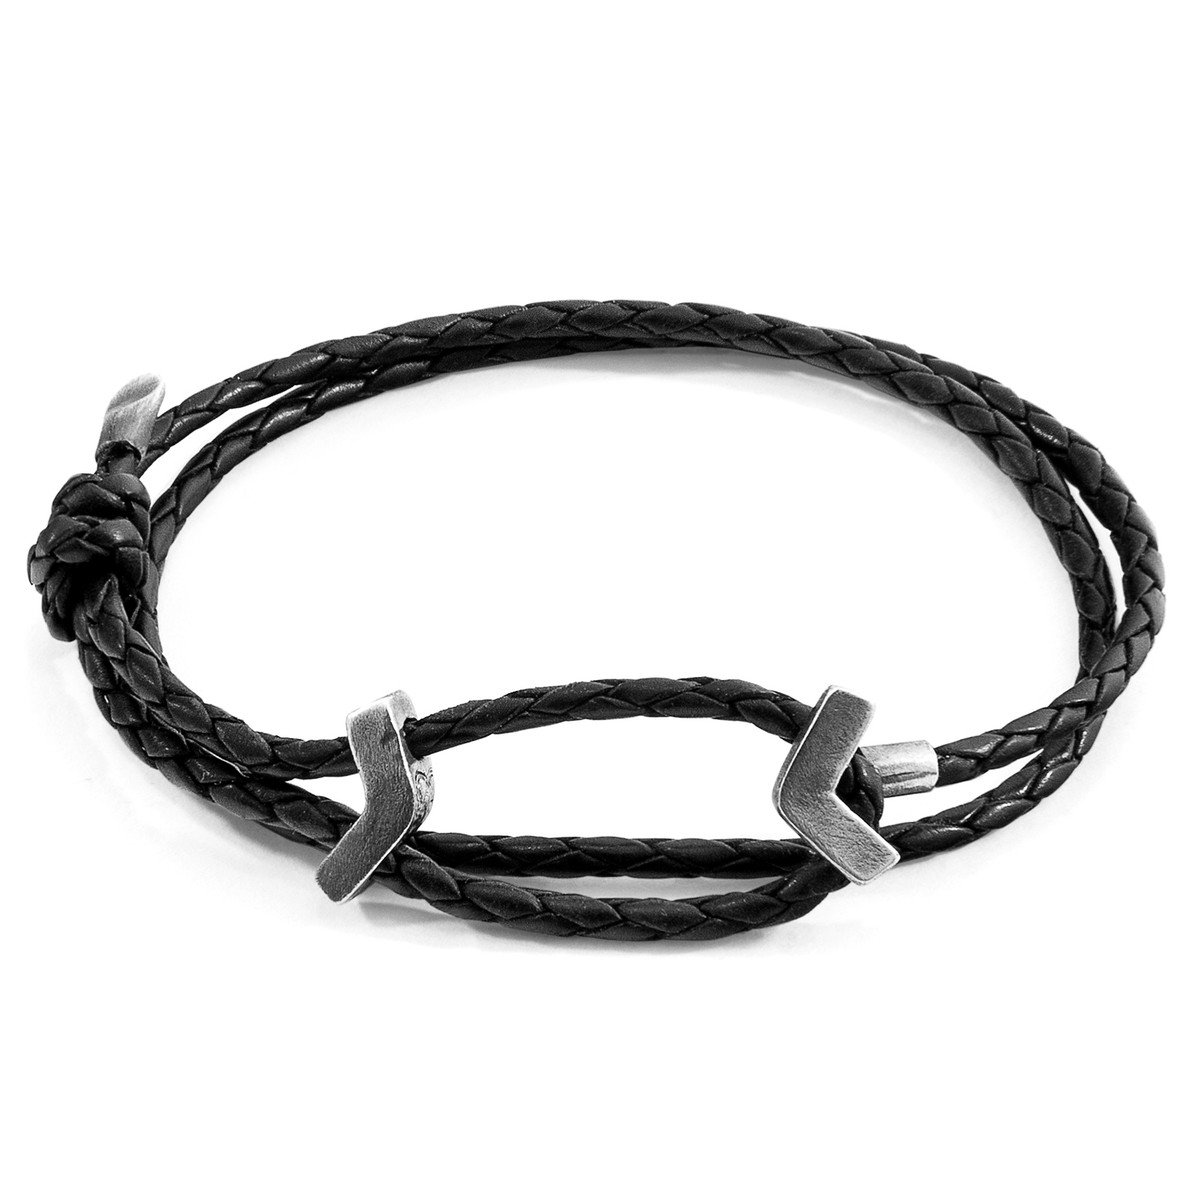 Midnight Black William Silver and Braided Leather SKINNY Bracelet